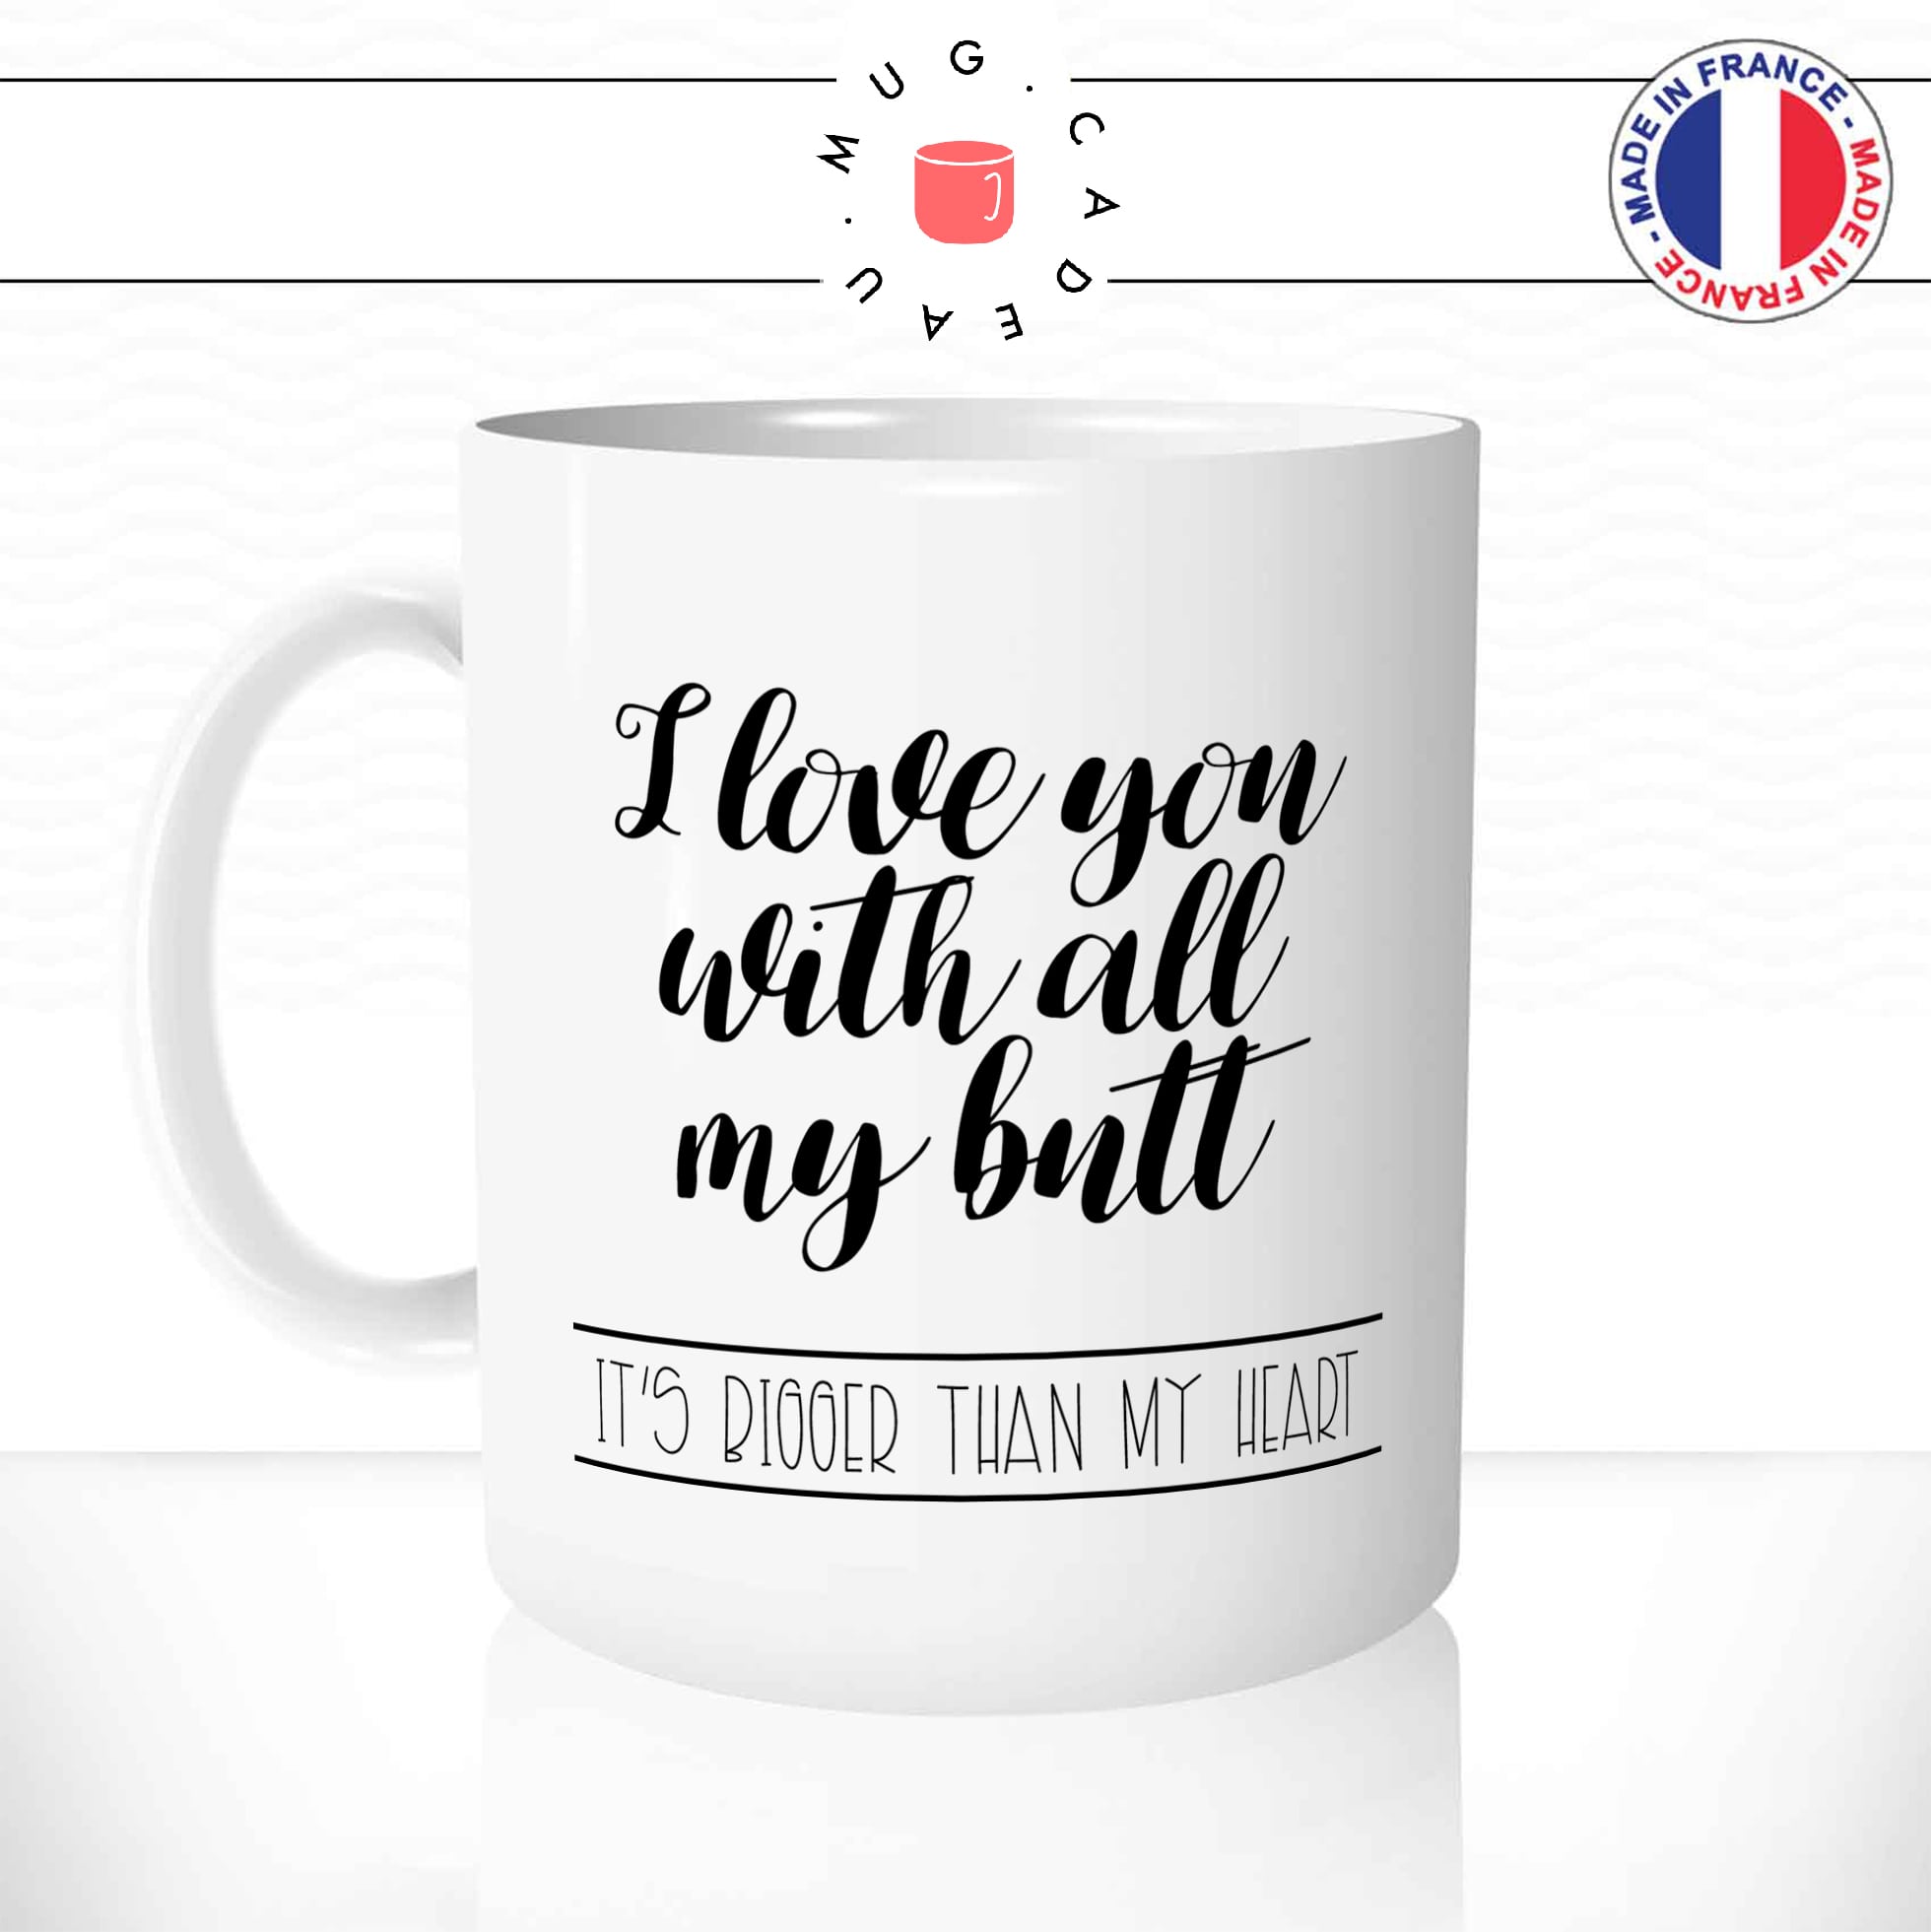 Mug I Love You With All My Butt